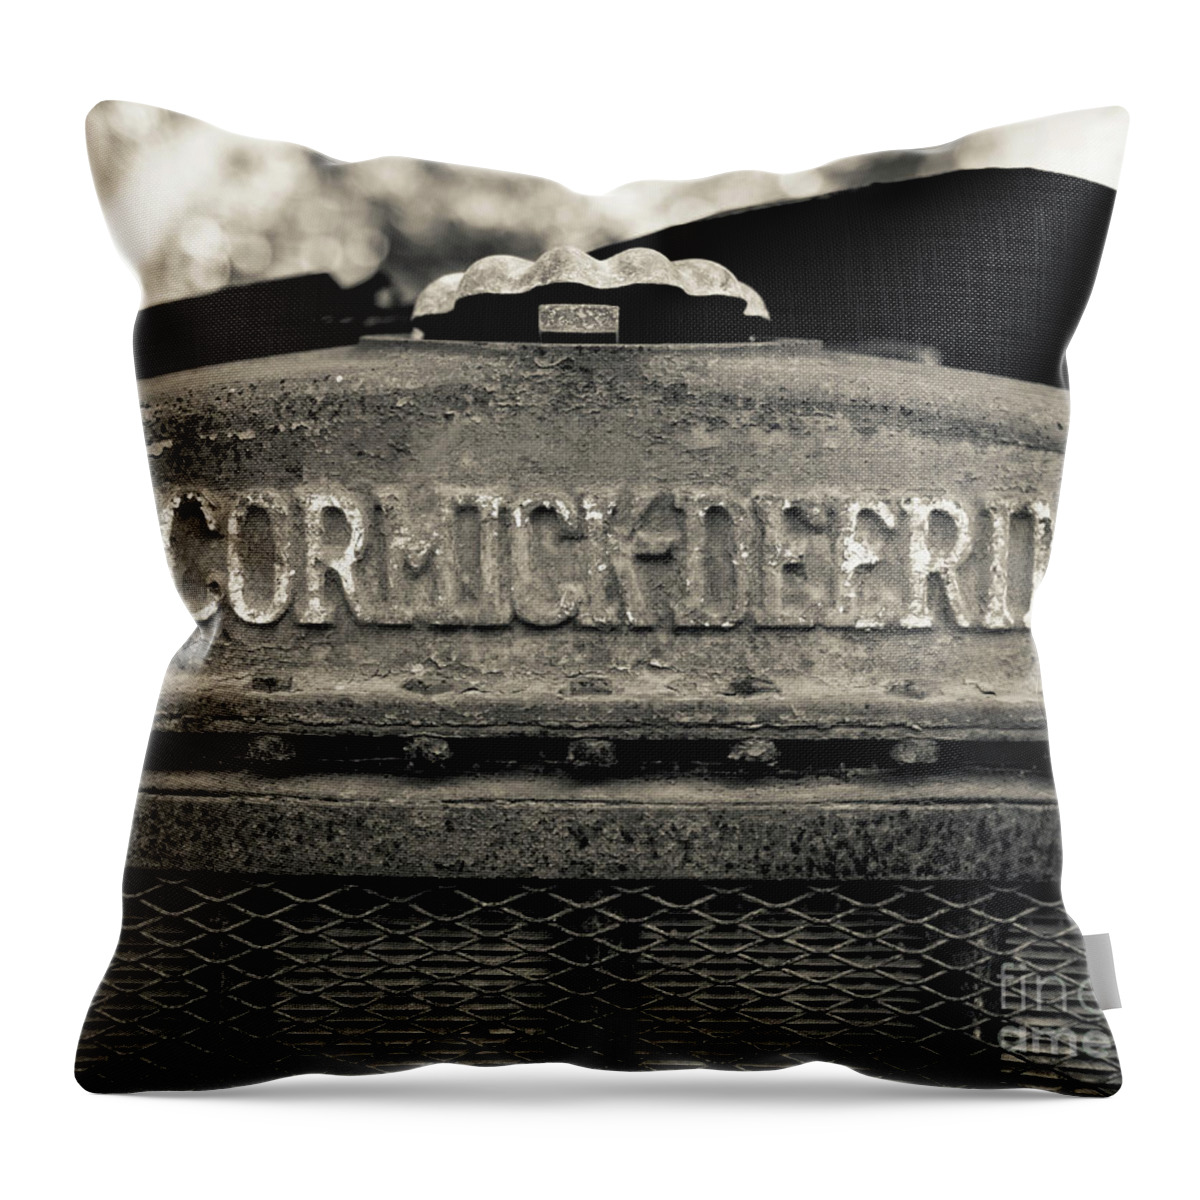 Mccormick-deering Throw Pillow featuring the photograph Rusty Old McCormick-Deering Tractor by Edward Fielding